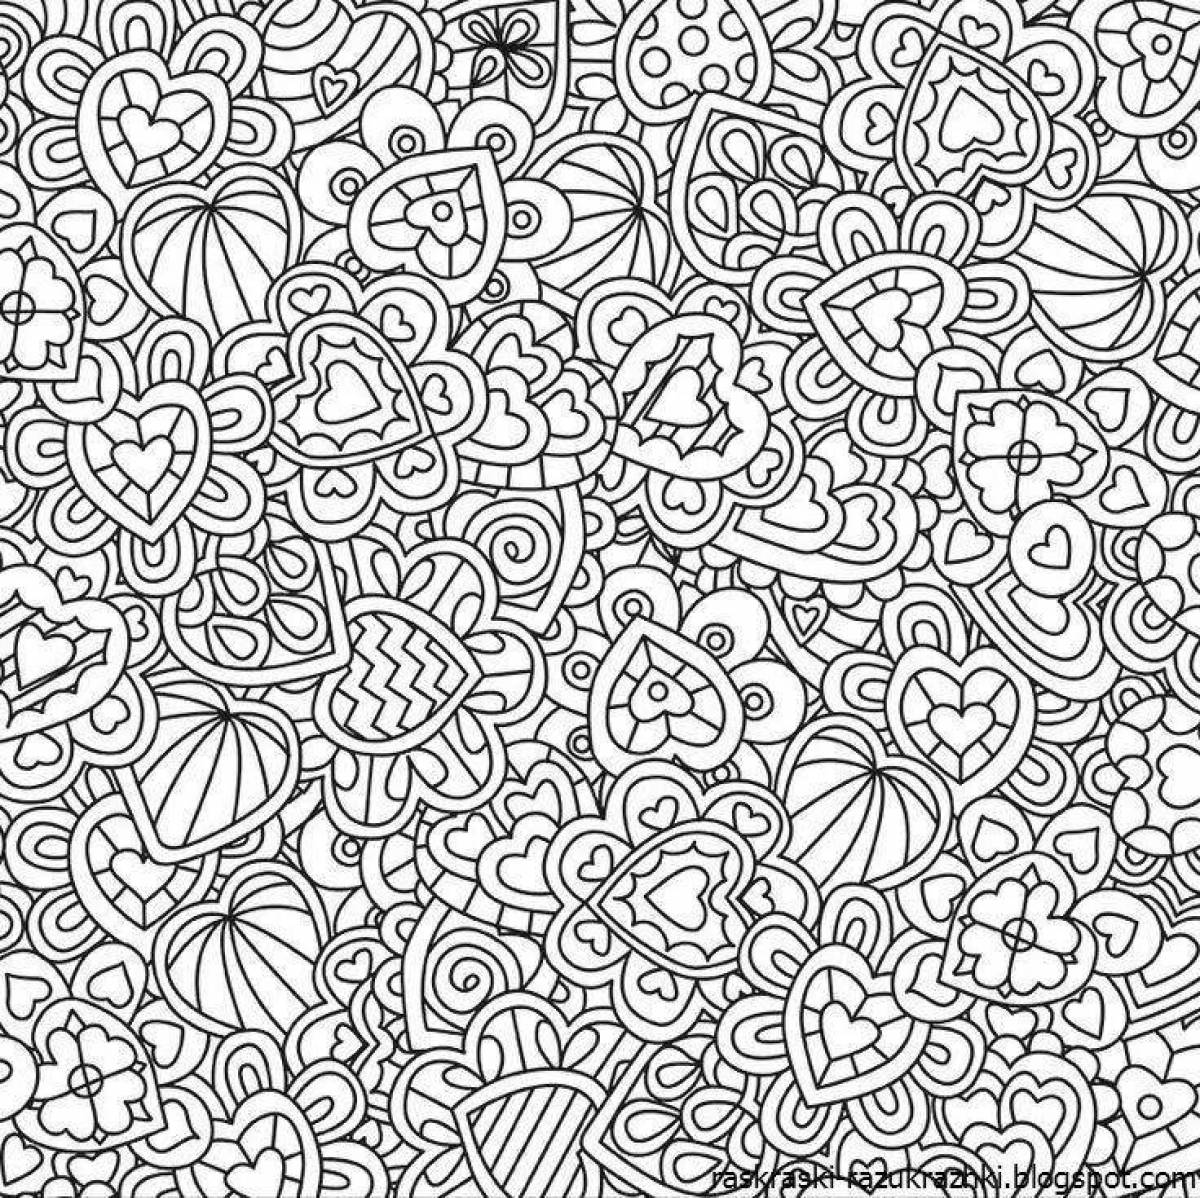 Colour-soaked coloring sheet